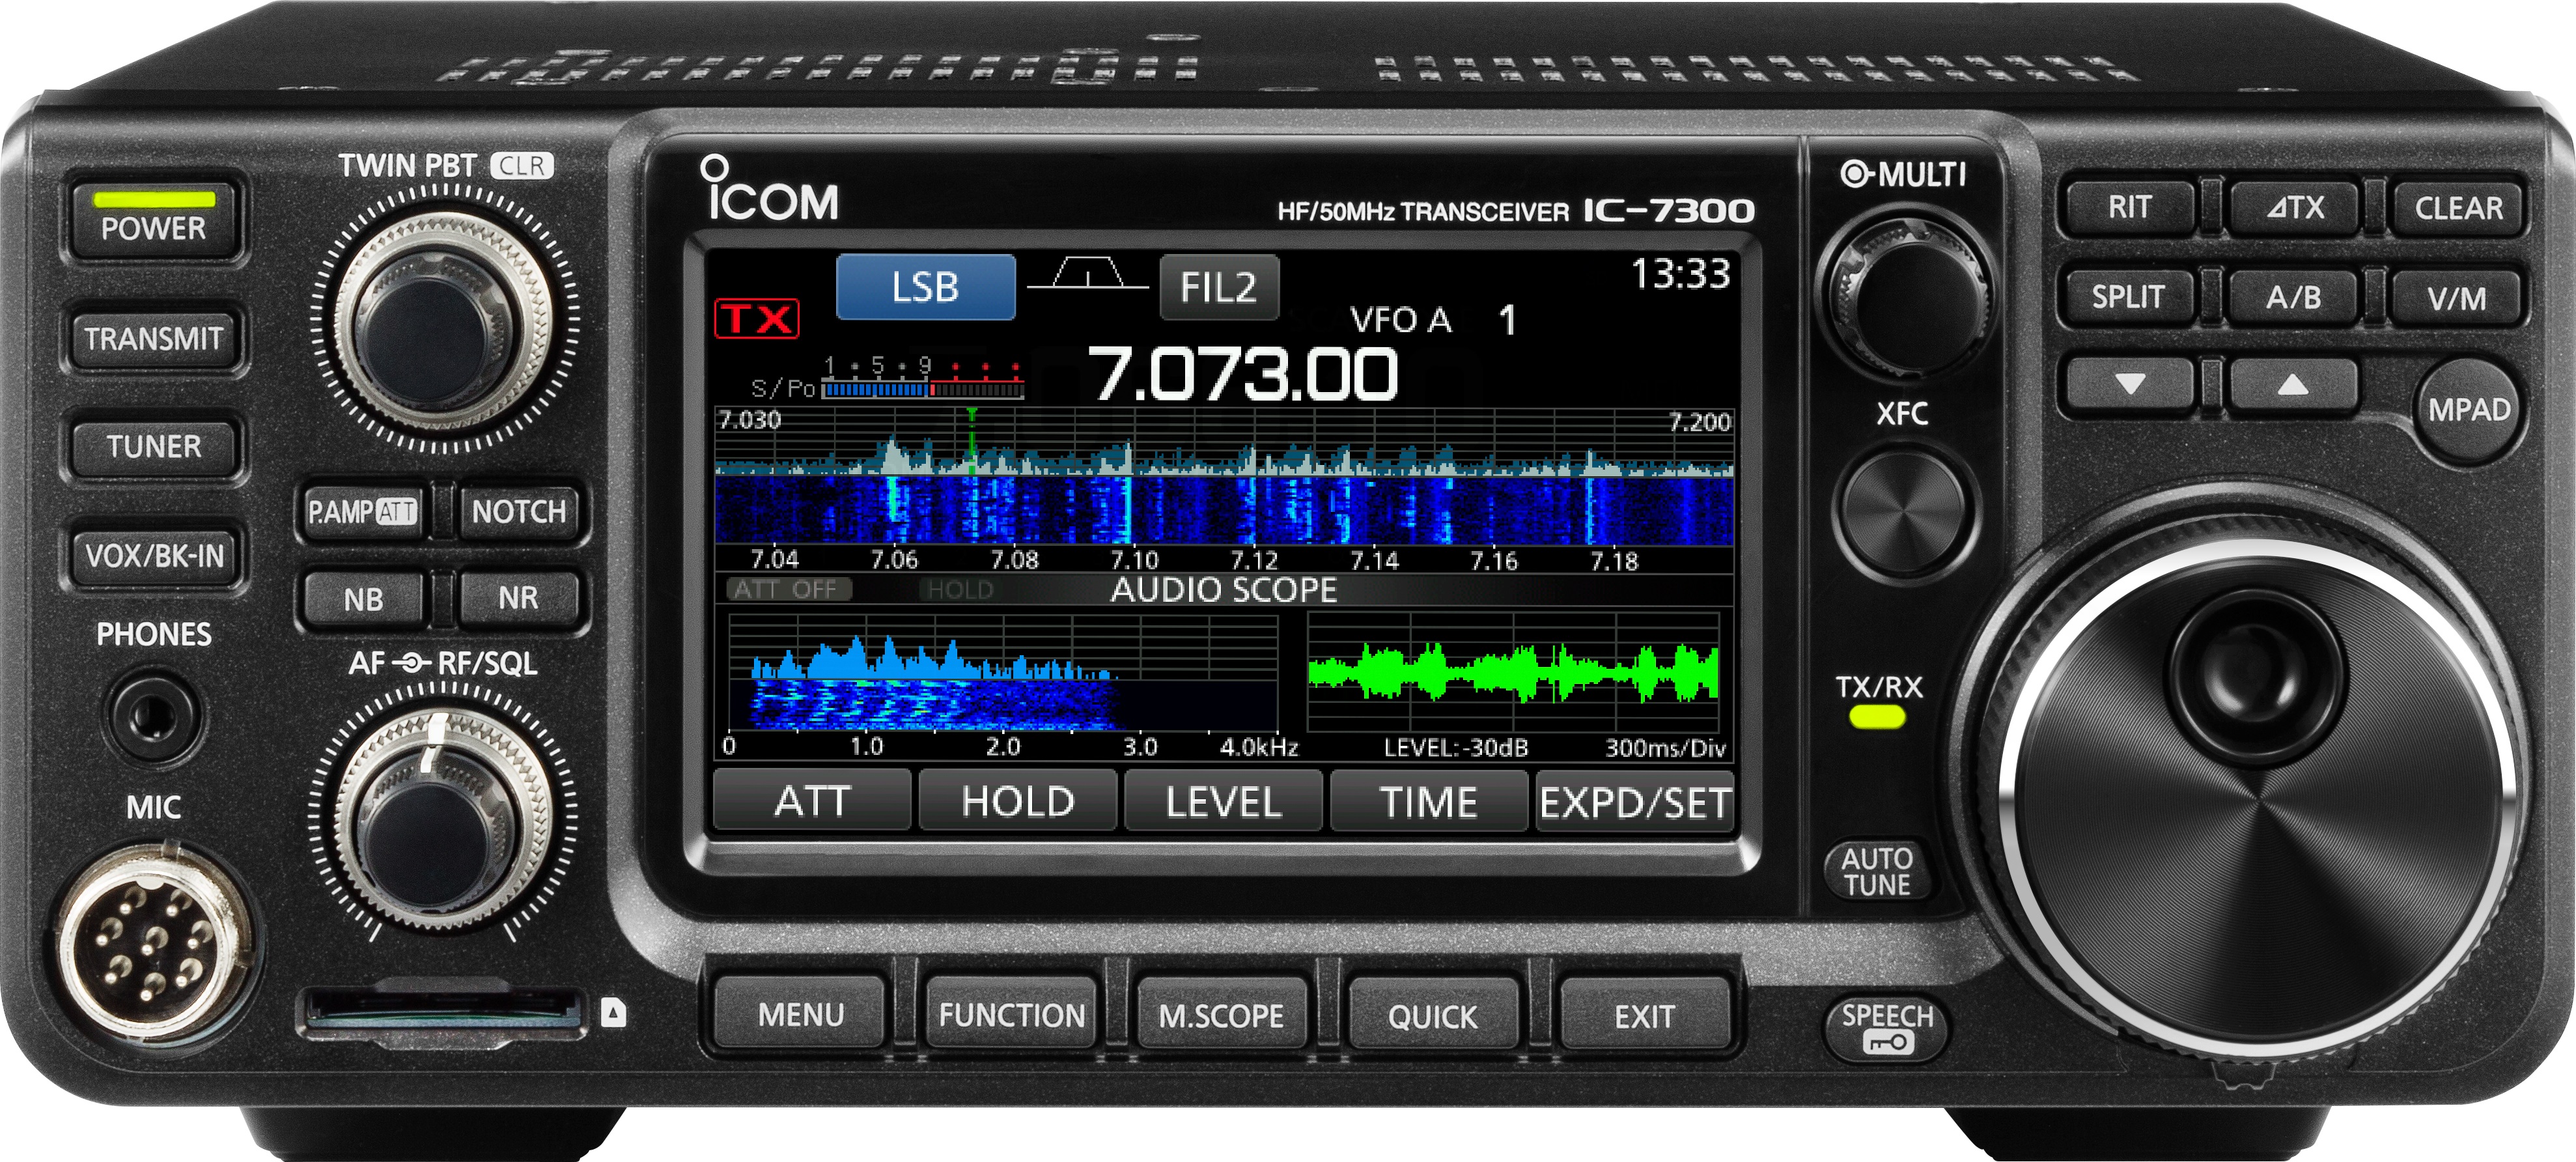 IC-7300 Review and operating tips